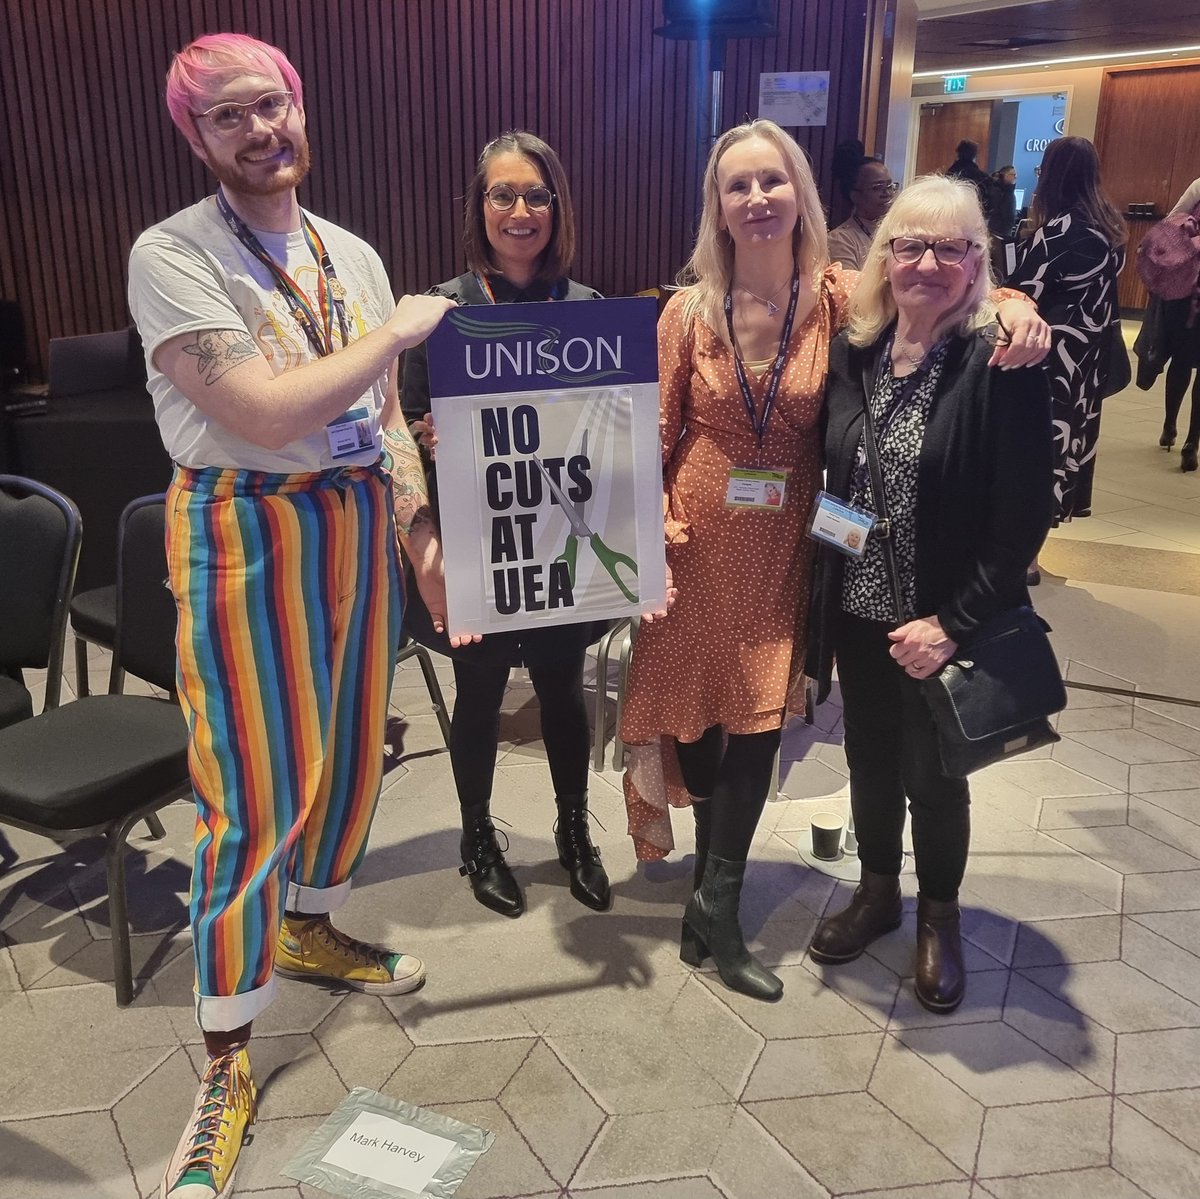 Absolutely solidarity with @UnisonUEA. The entire HE conference stands with you. #NoCutsAtUEA #uhighered23